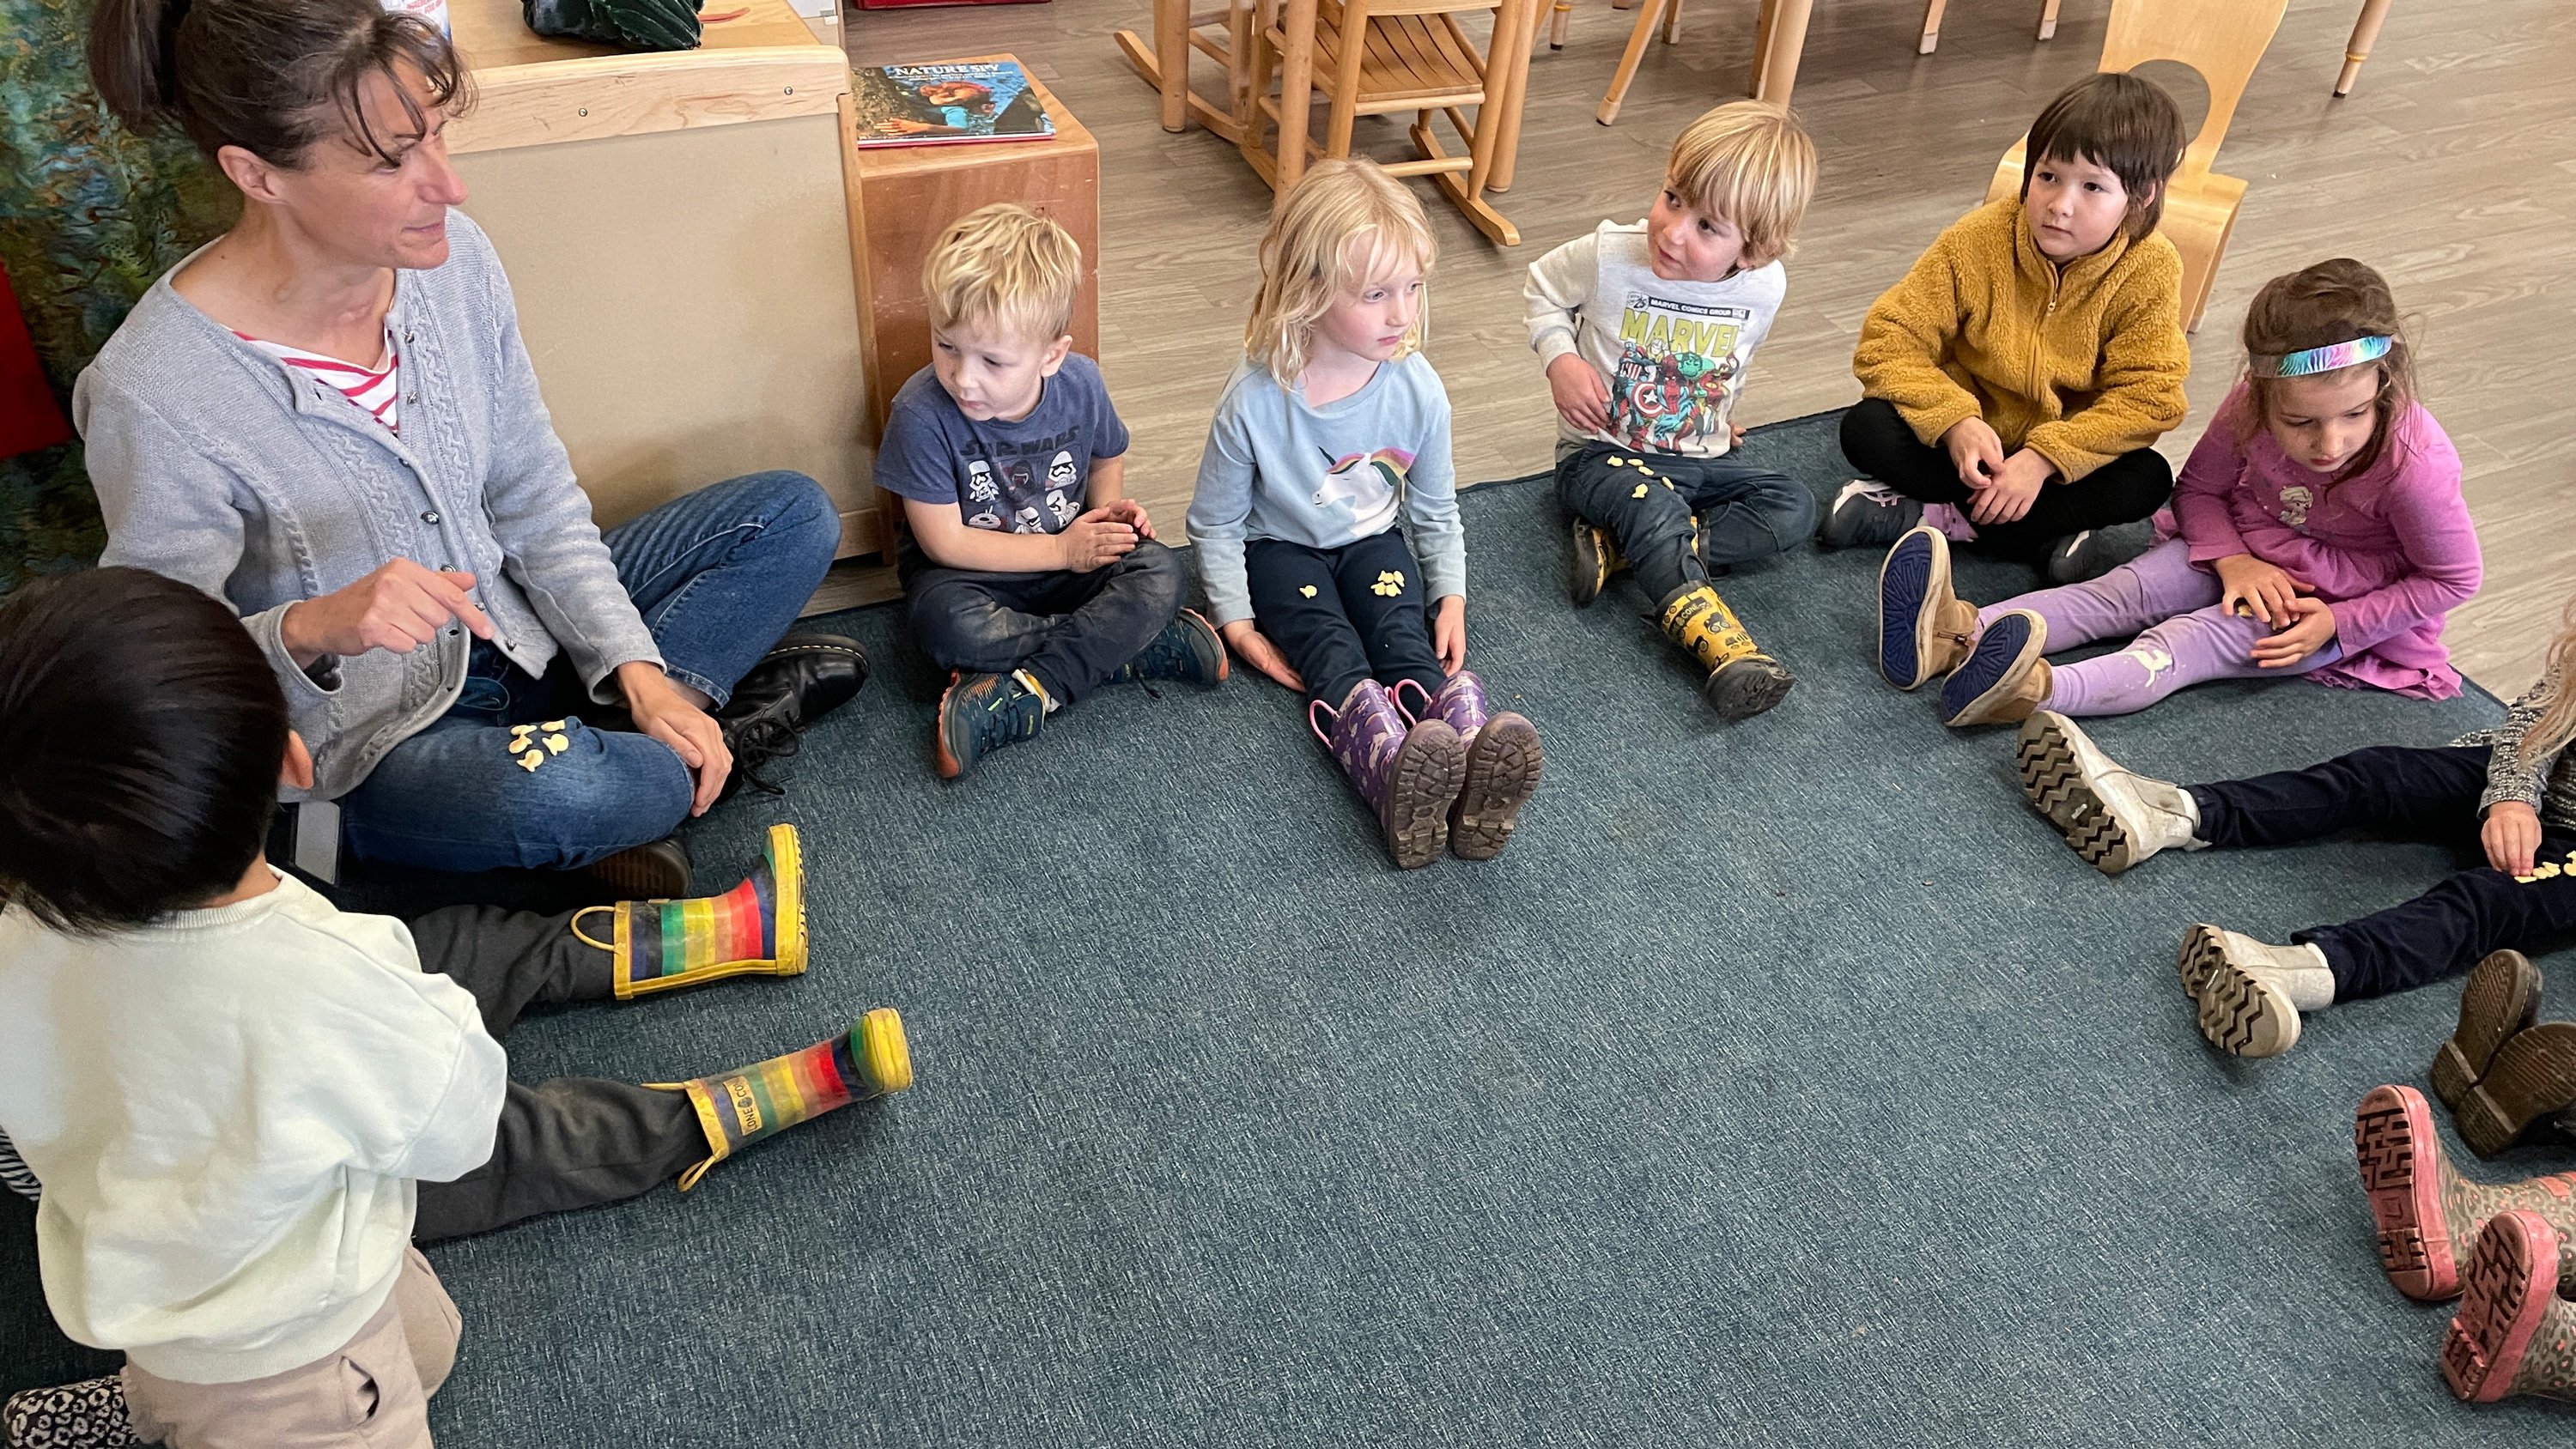 German Early Years students sit in a circle learning from one another.